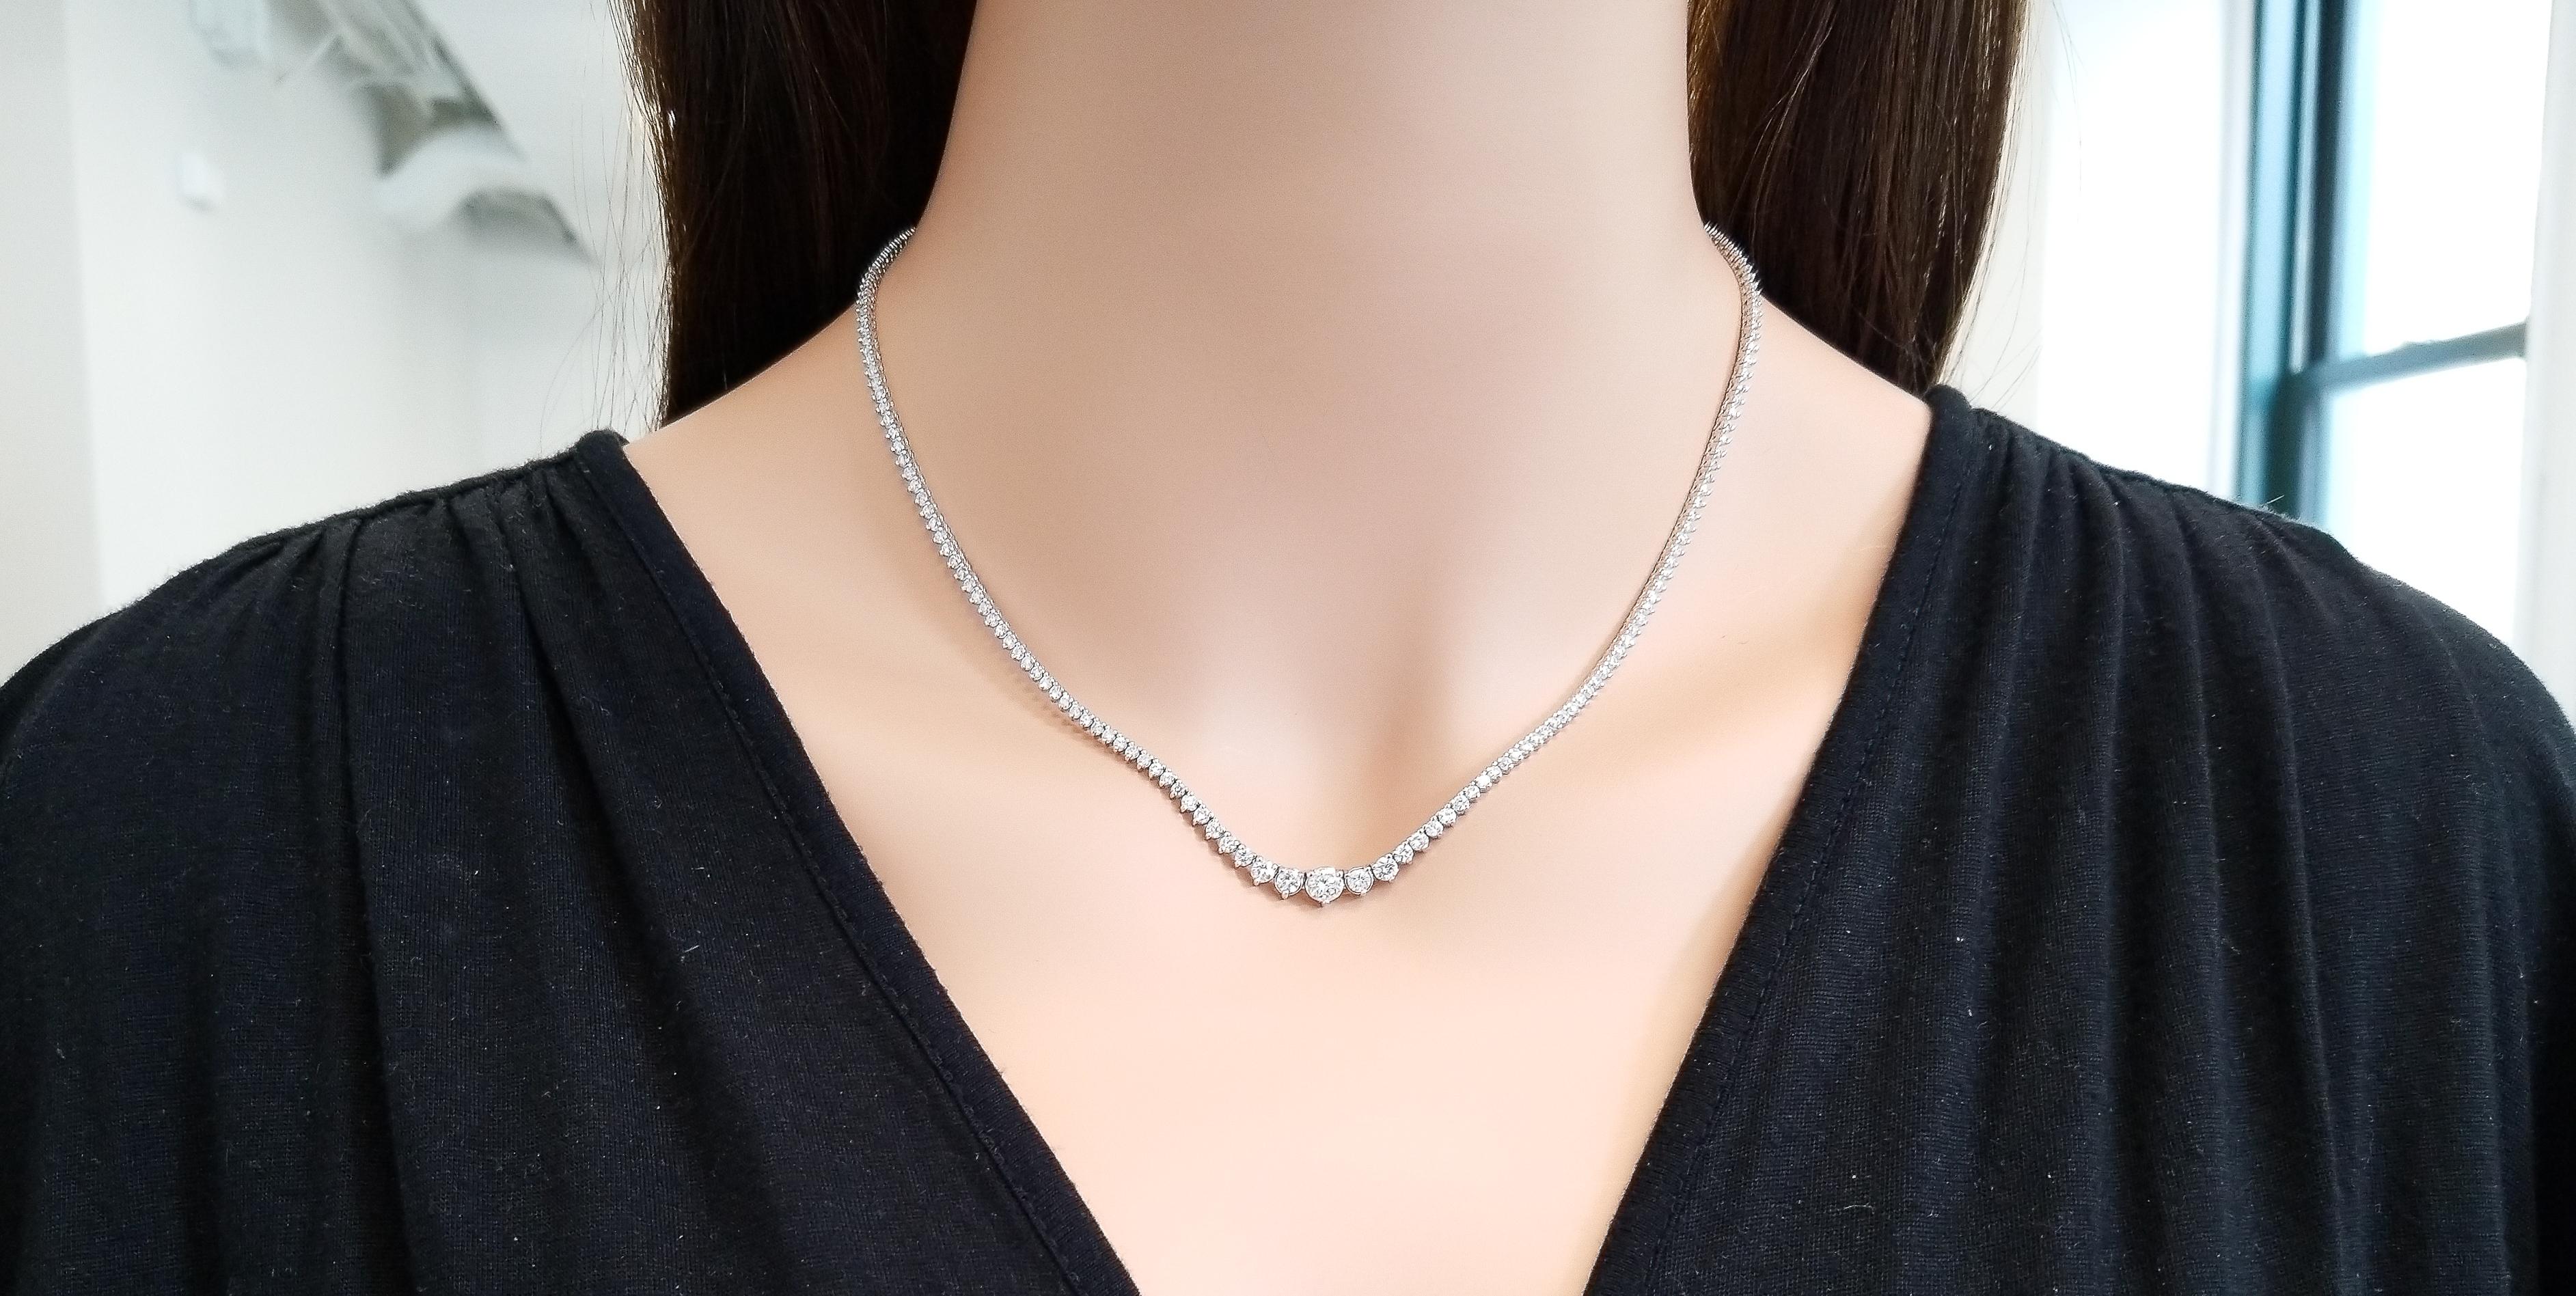 This luxurious 18 inch RIVIERA necklace is timeless elegance. A total of 223 glittering round brilliant cut diamonds are 3-prong set in graduated size with the largest in the middle from end to end in one row eternity style totaling 5.40 carats. A